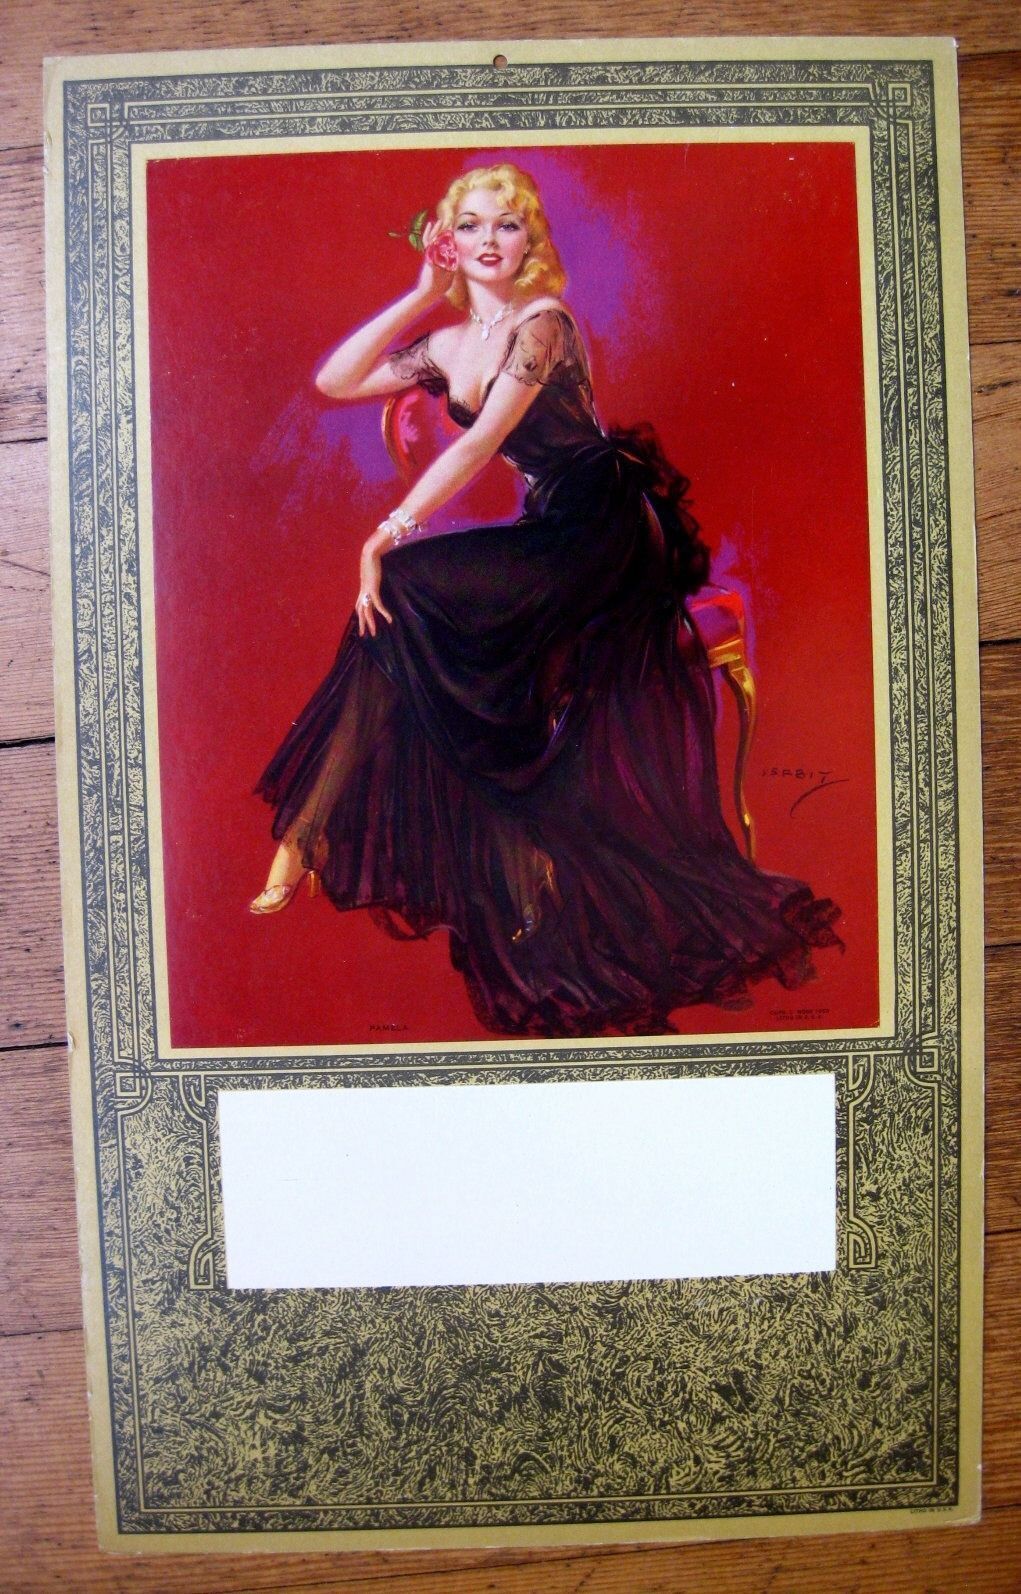 1950 Gorgeous Formal Blond Pinup Girl Picture Pamela by Erbit